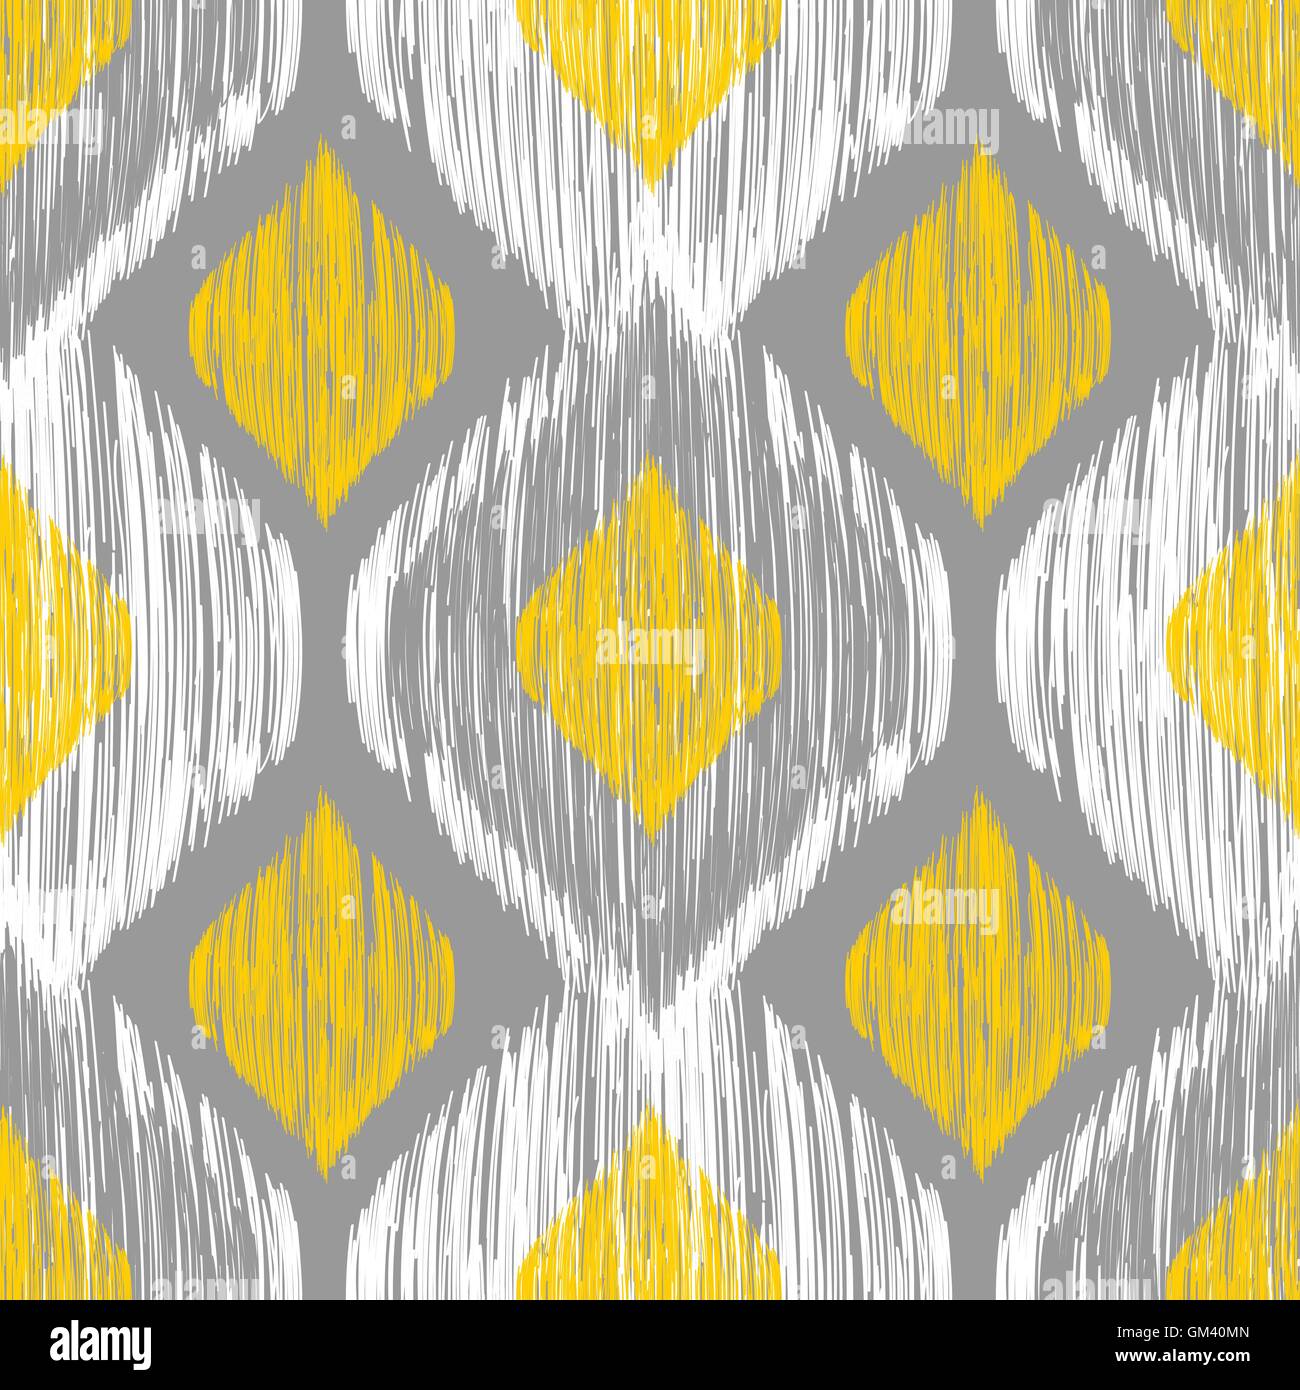 Ikat ethnic seamless pattern in blue and yellow colors Stock Vector